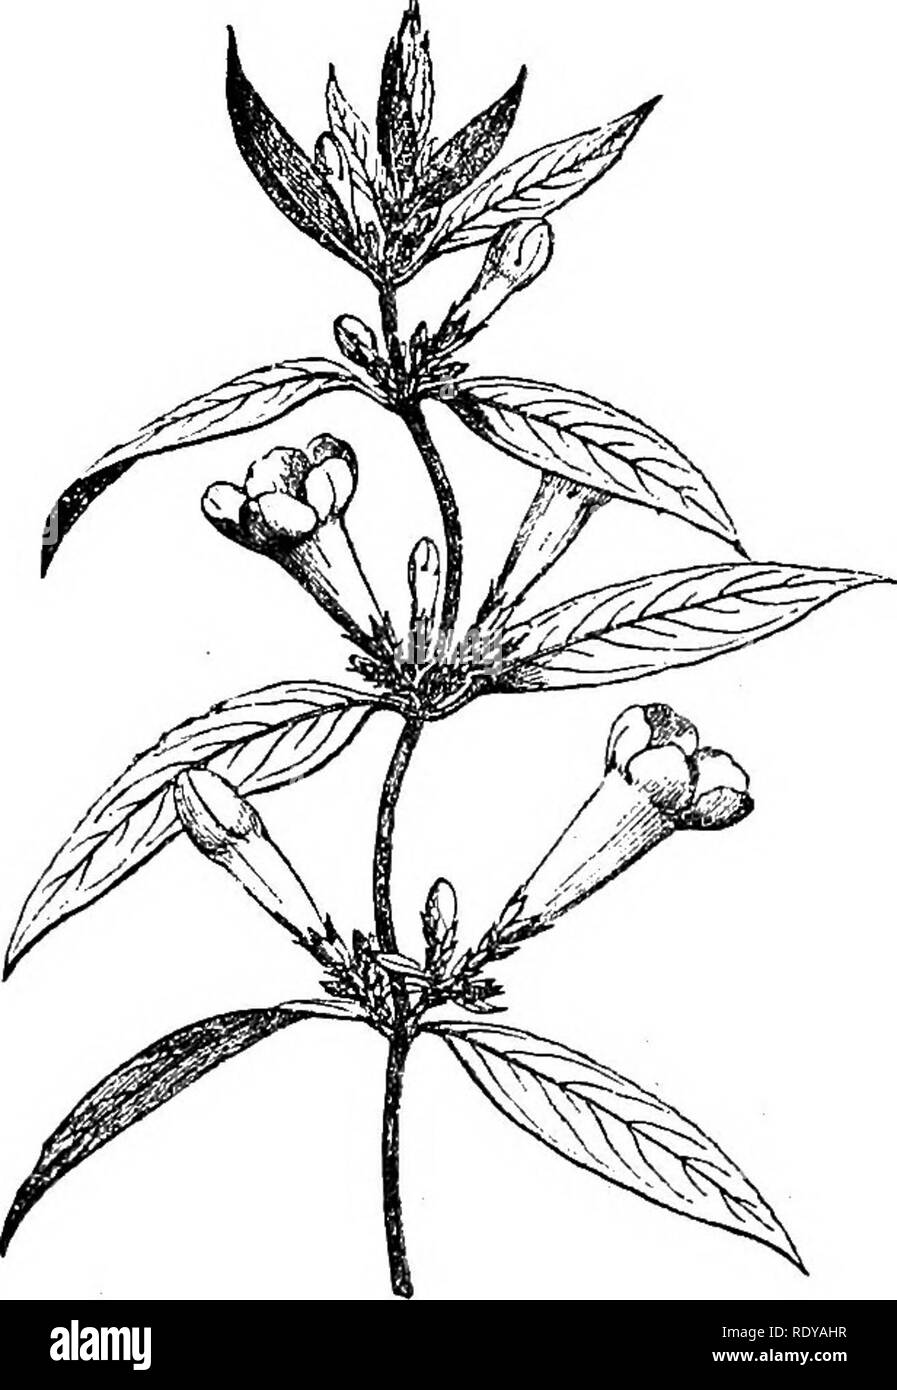 . A manual of poisonous plants, chiefly of eastern North America, with brief notes on economic and medicinal plants, and numerous illustrations. Poisonous plants. 686 MANUAL OF POISONOUS PLANTS seeds covered with silky hairs. The seeds contain two deadly alkaloids, strych- nin Cj^HjjNjOj and brucin C^jH^gN^O^+^H^O. Strychnin is bitter, used as a tonic and to stimulate the circulation. The bark and root are also bitter. The natives of India use it for snake bites and fevers. This alkaloid is also ob- tained from other plants of this order, being extracted by water acidulated with hydrochloric a Stock Photo